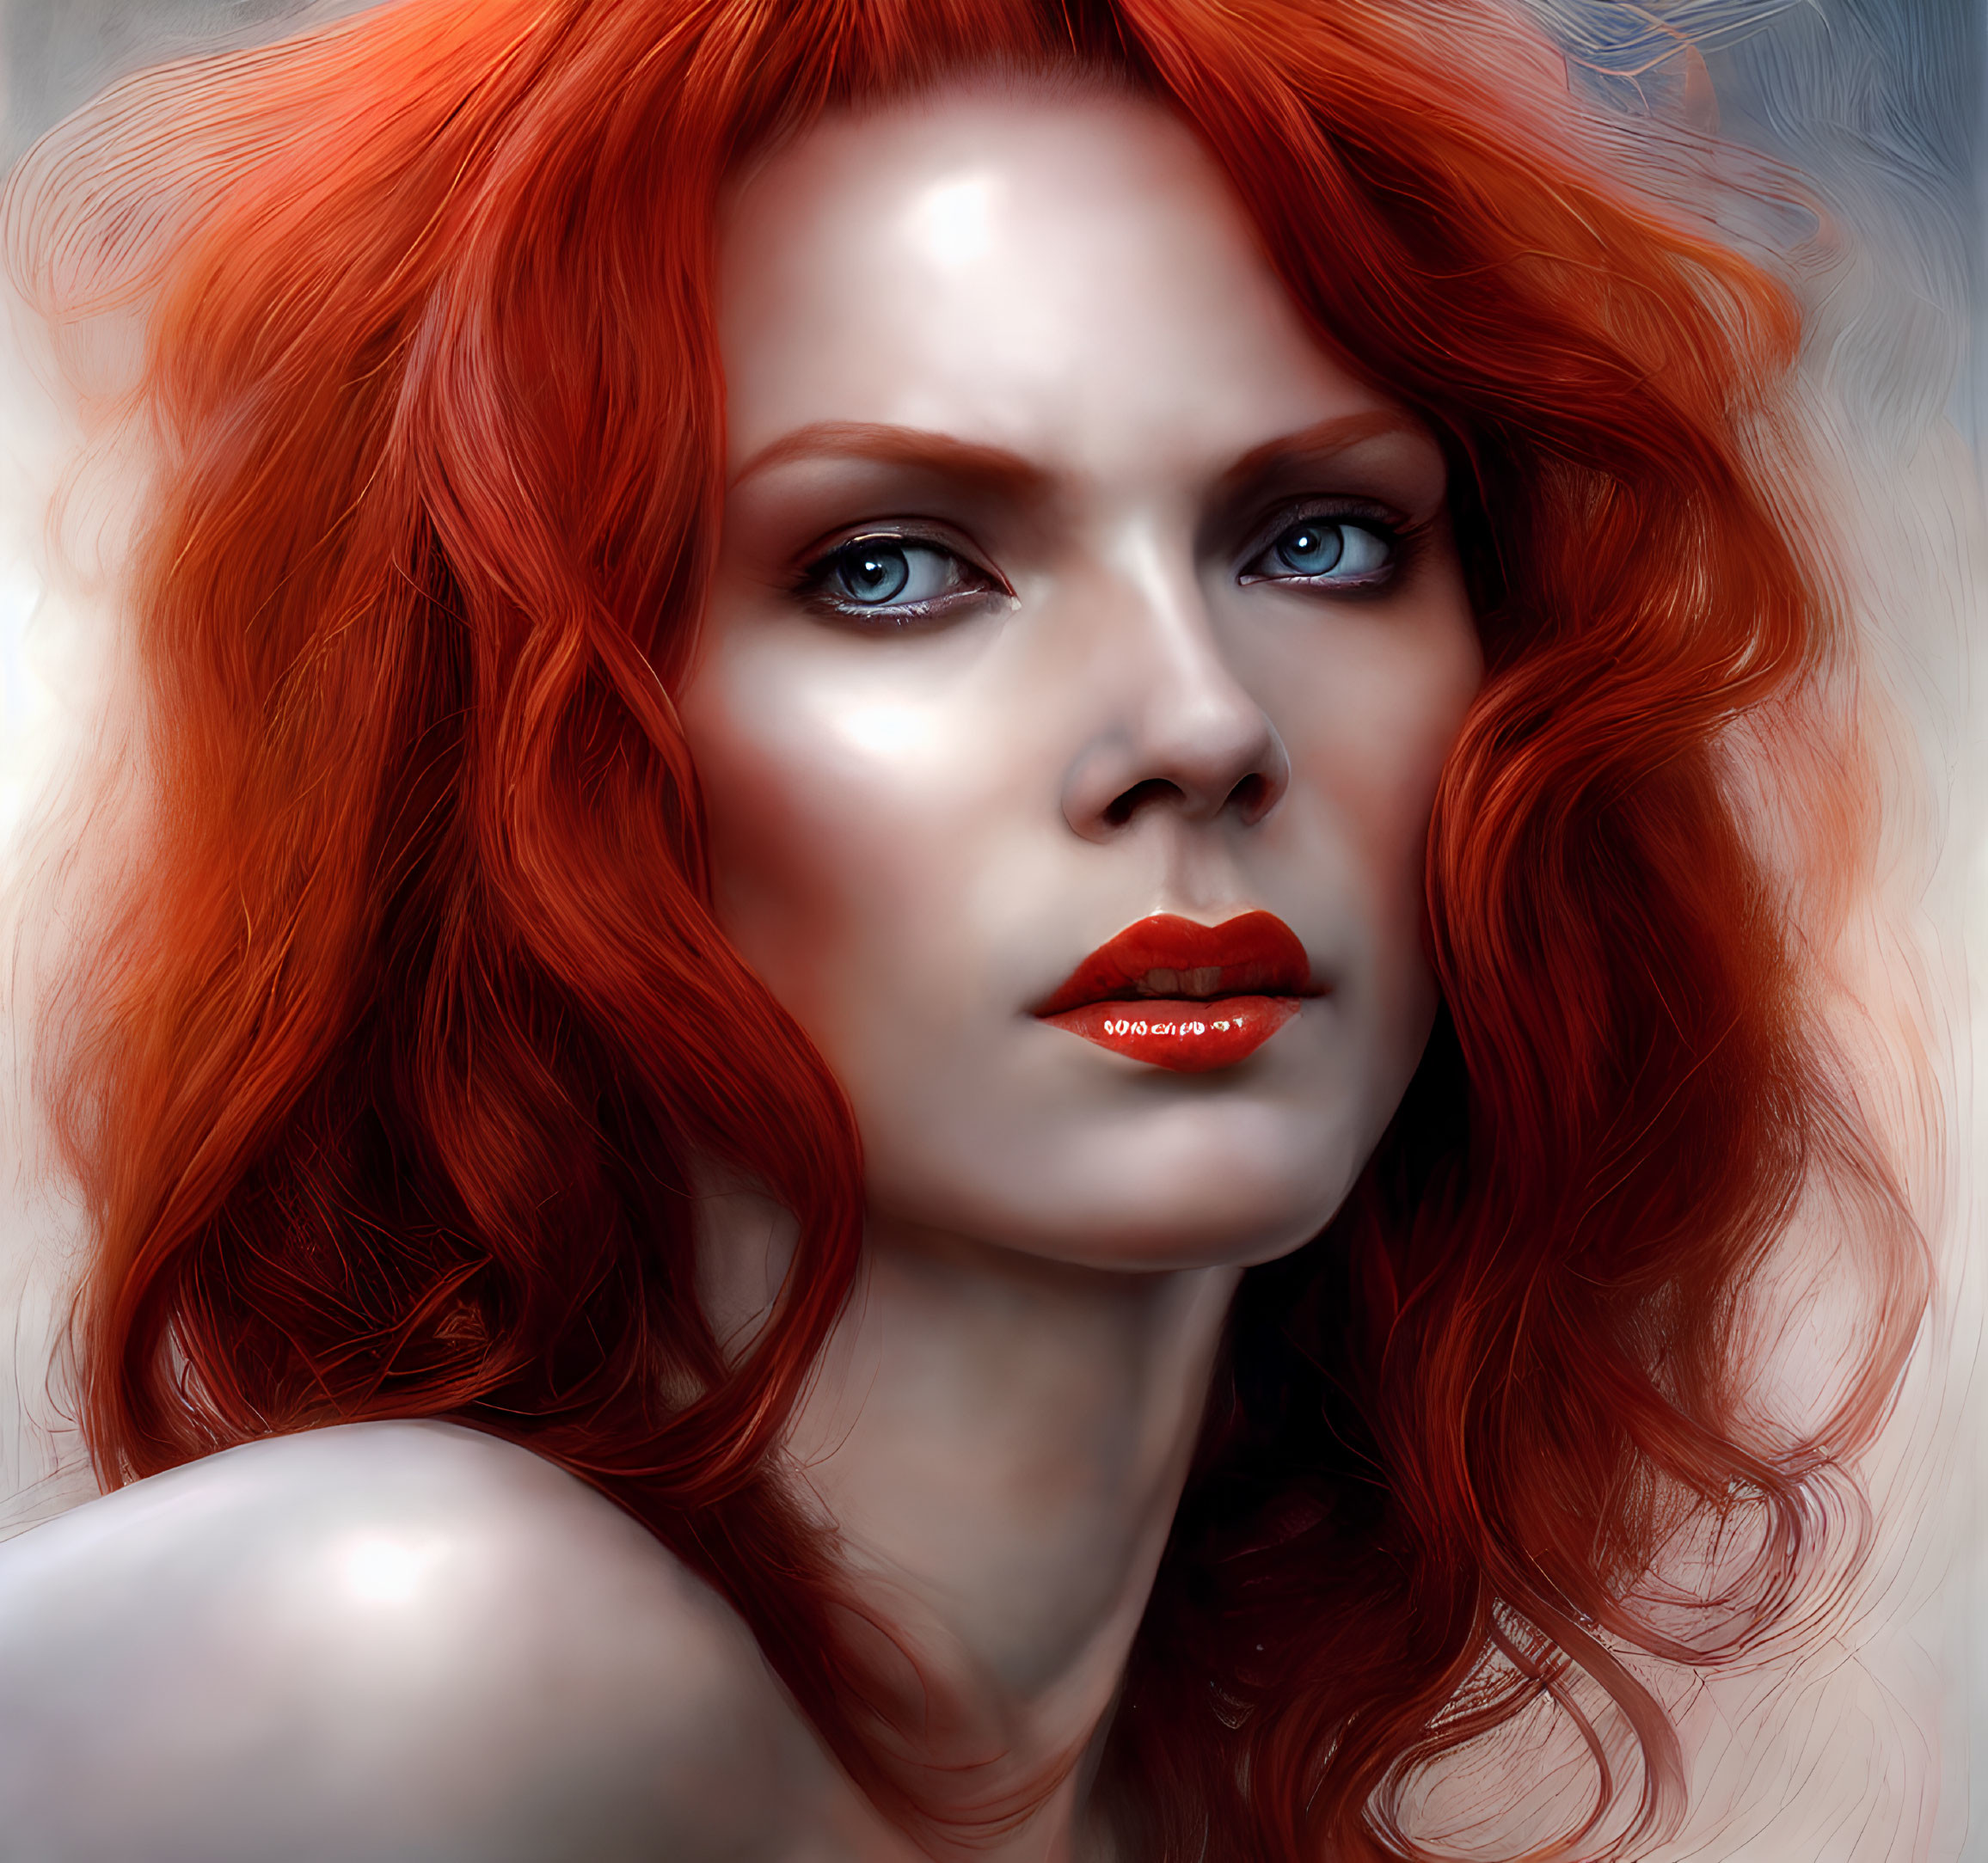 Striking red-haired woman with intense blue eyes in digital portrait